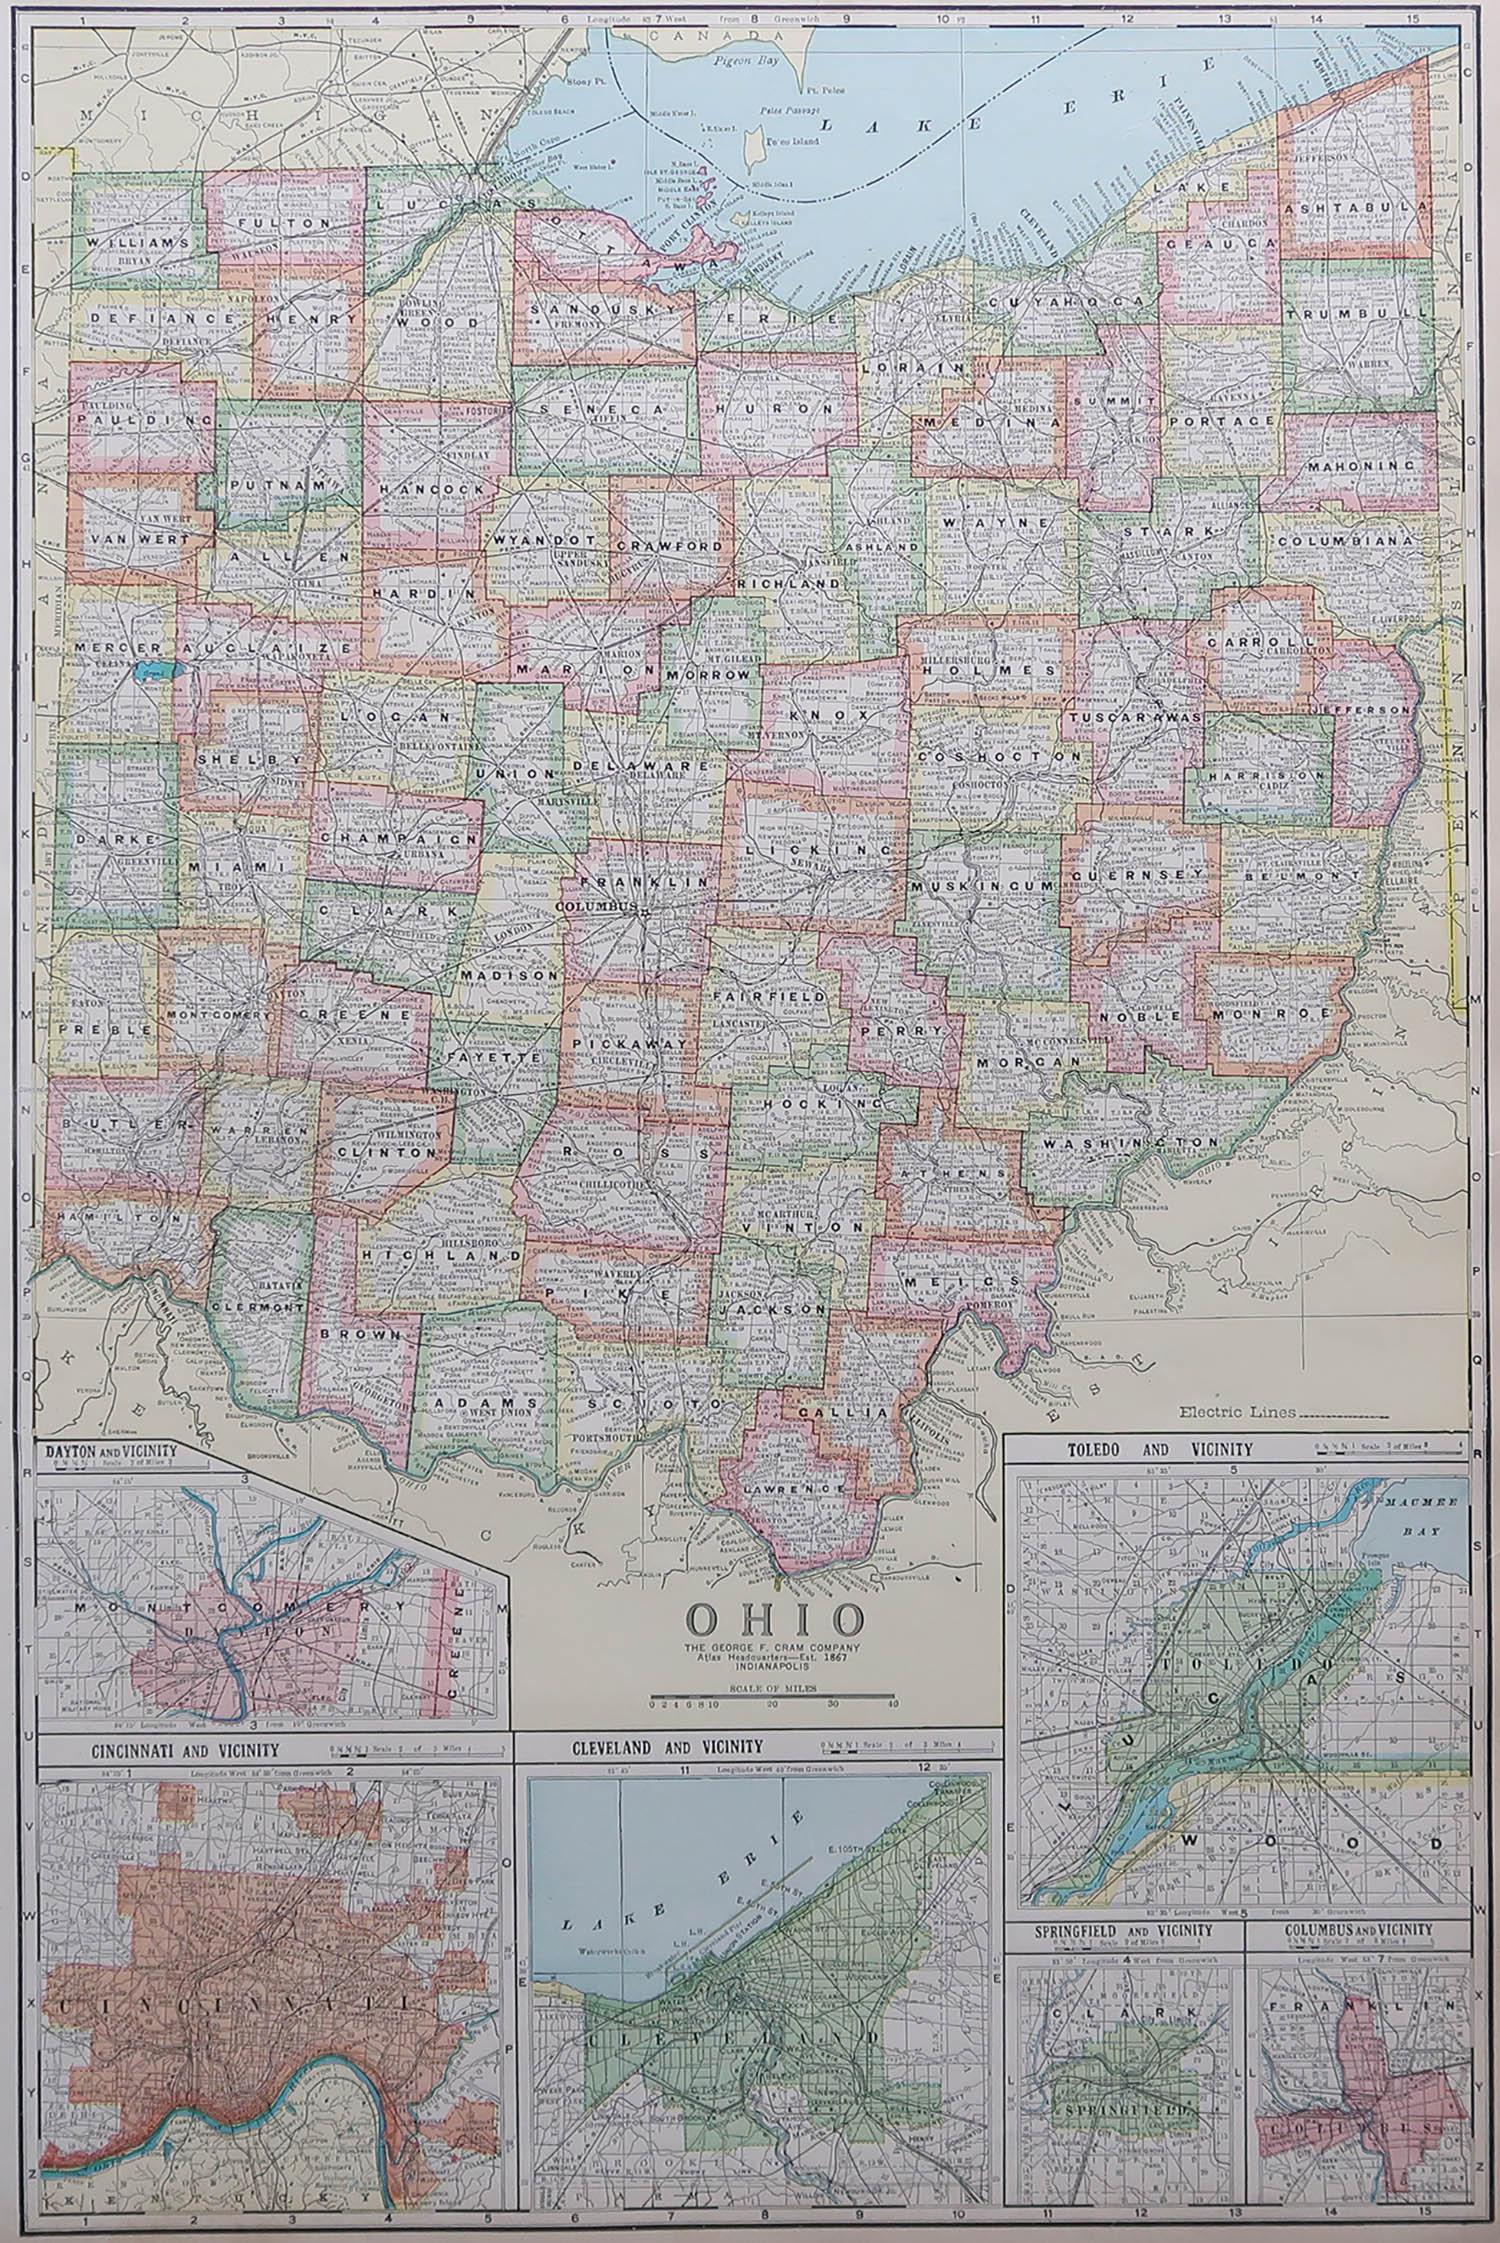 Fabulous map of Ohio

Original color.

Engraved and printed by the George F. Cram Company, Indianapolis.

Published, C.1900.

Unframed.

Free shipping.